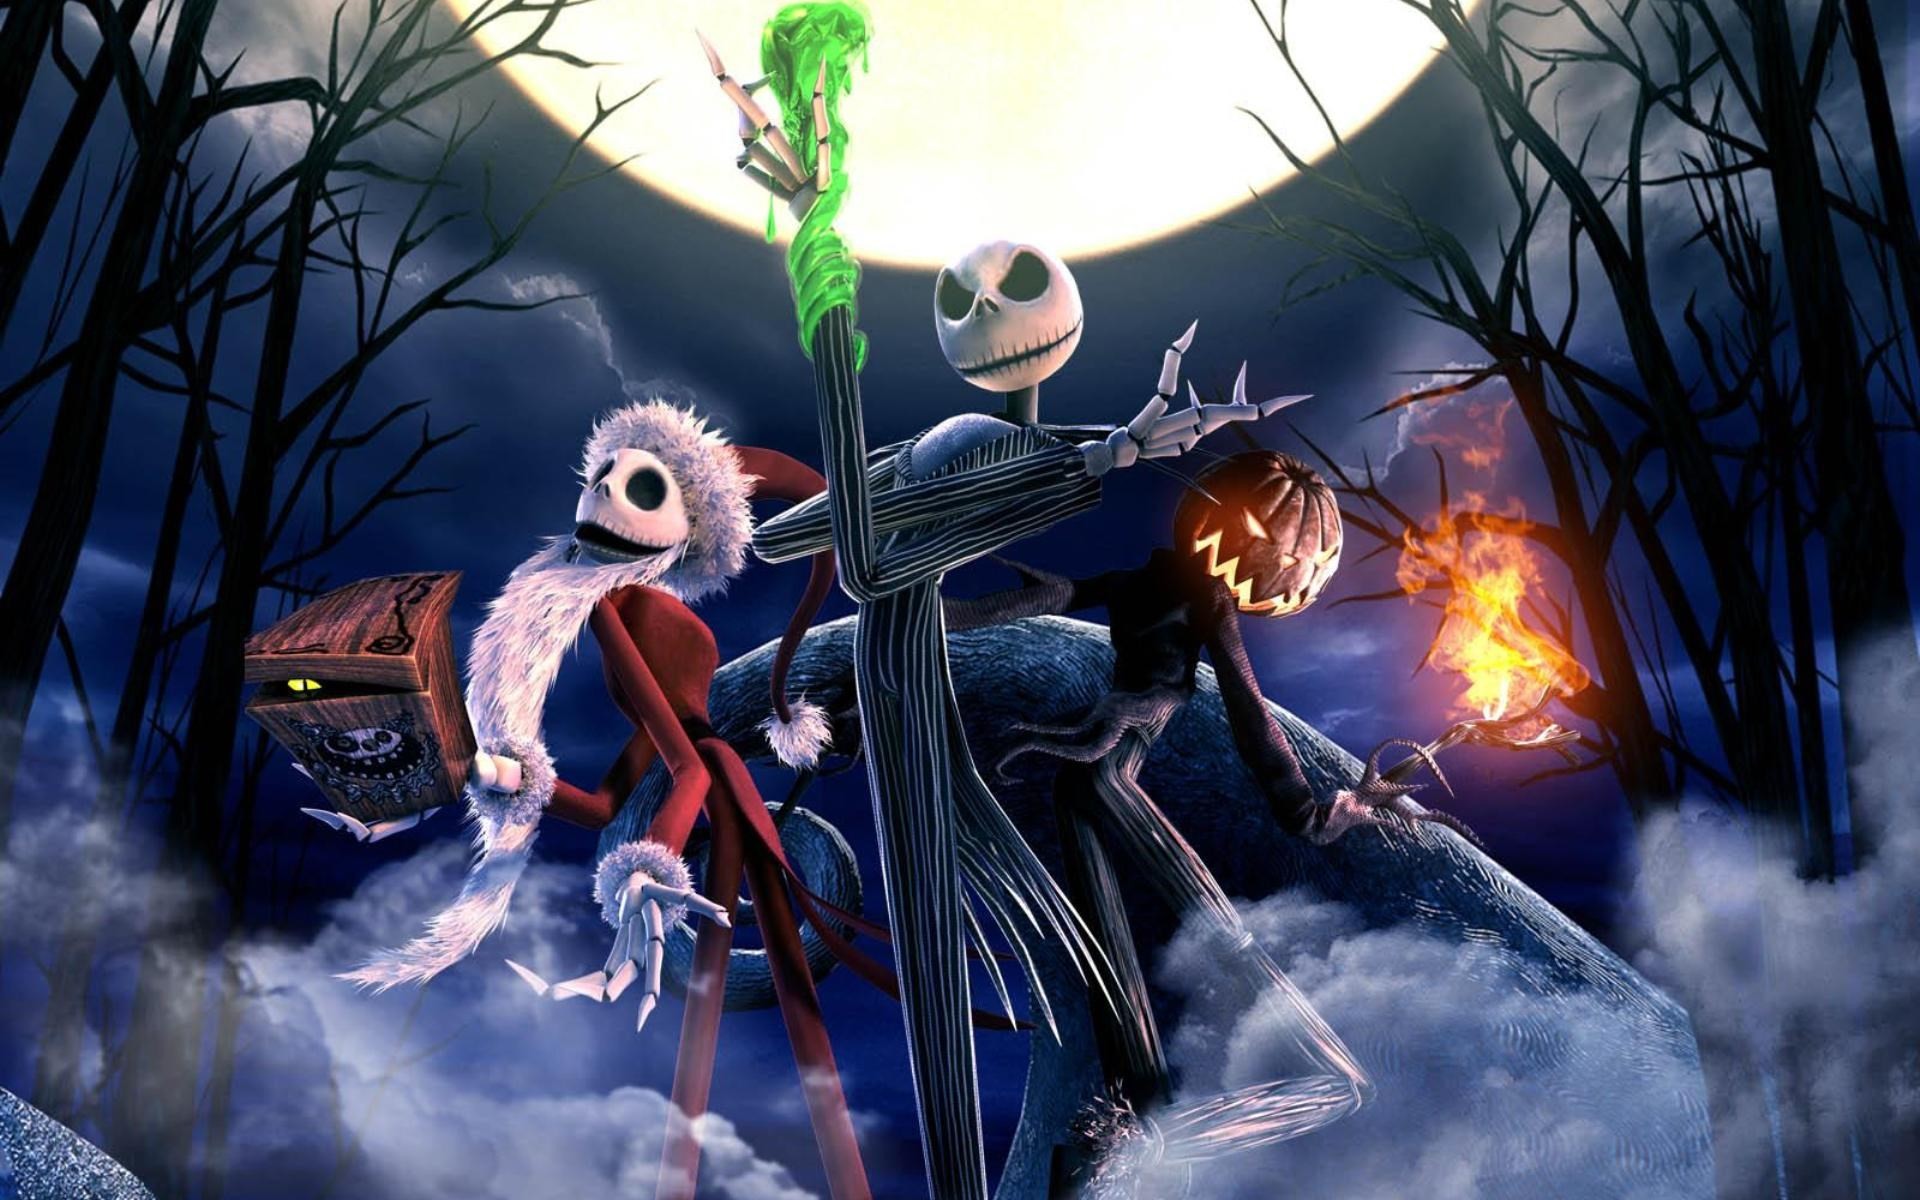 1920x1200 2017-03-18 - the nightmare before christmas images for desktop background, #